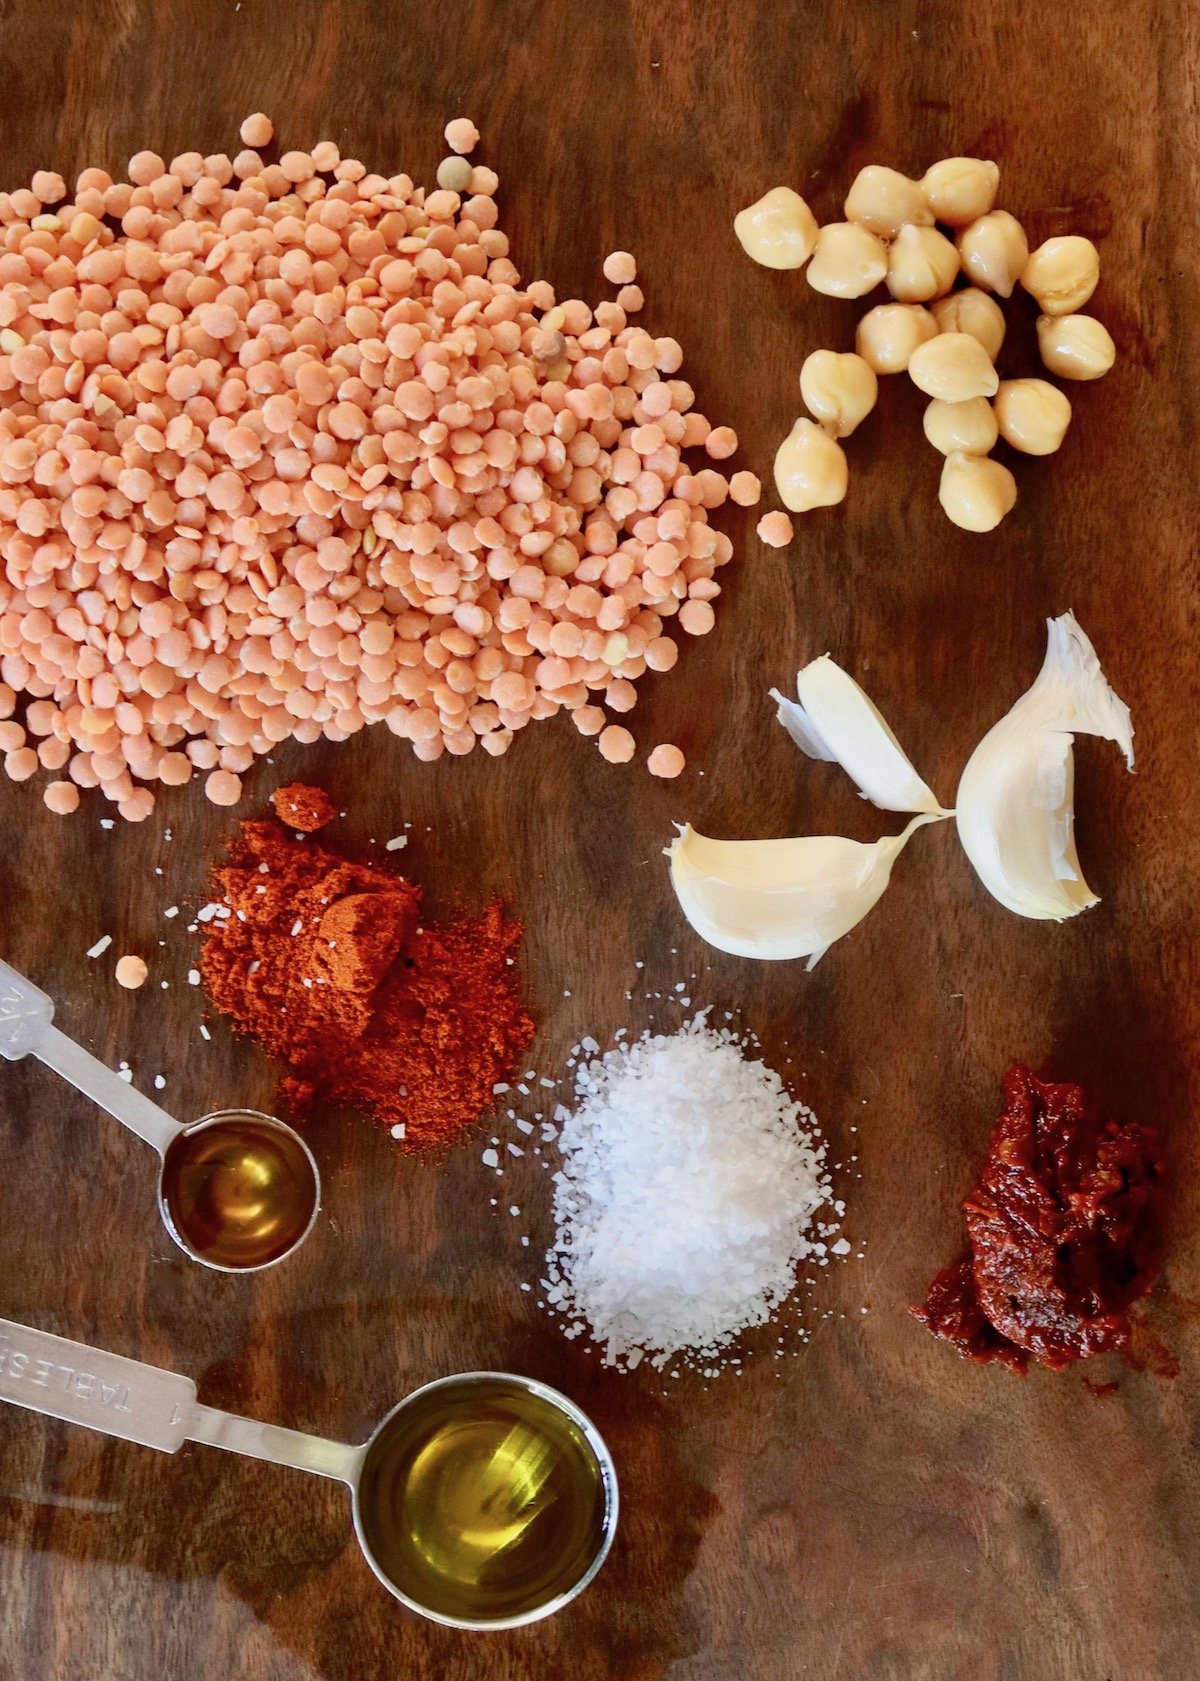 Ingredients for lentil hummus on dark wood cutting board - pile of dry red lentils, garlic cloves, salt, paprika, honey, oil, garbanzo beans and chipotles.